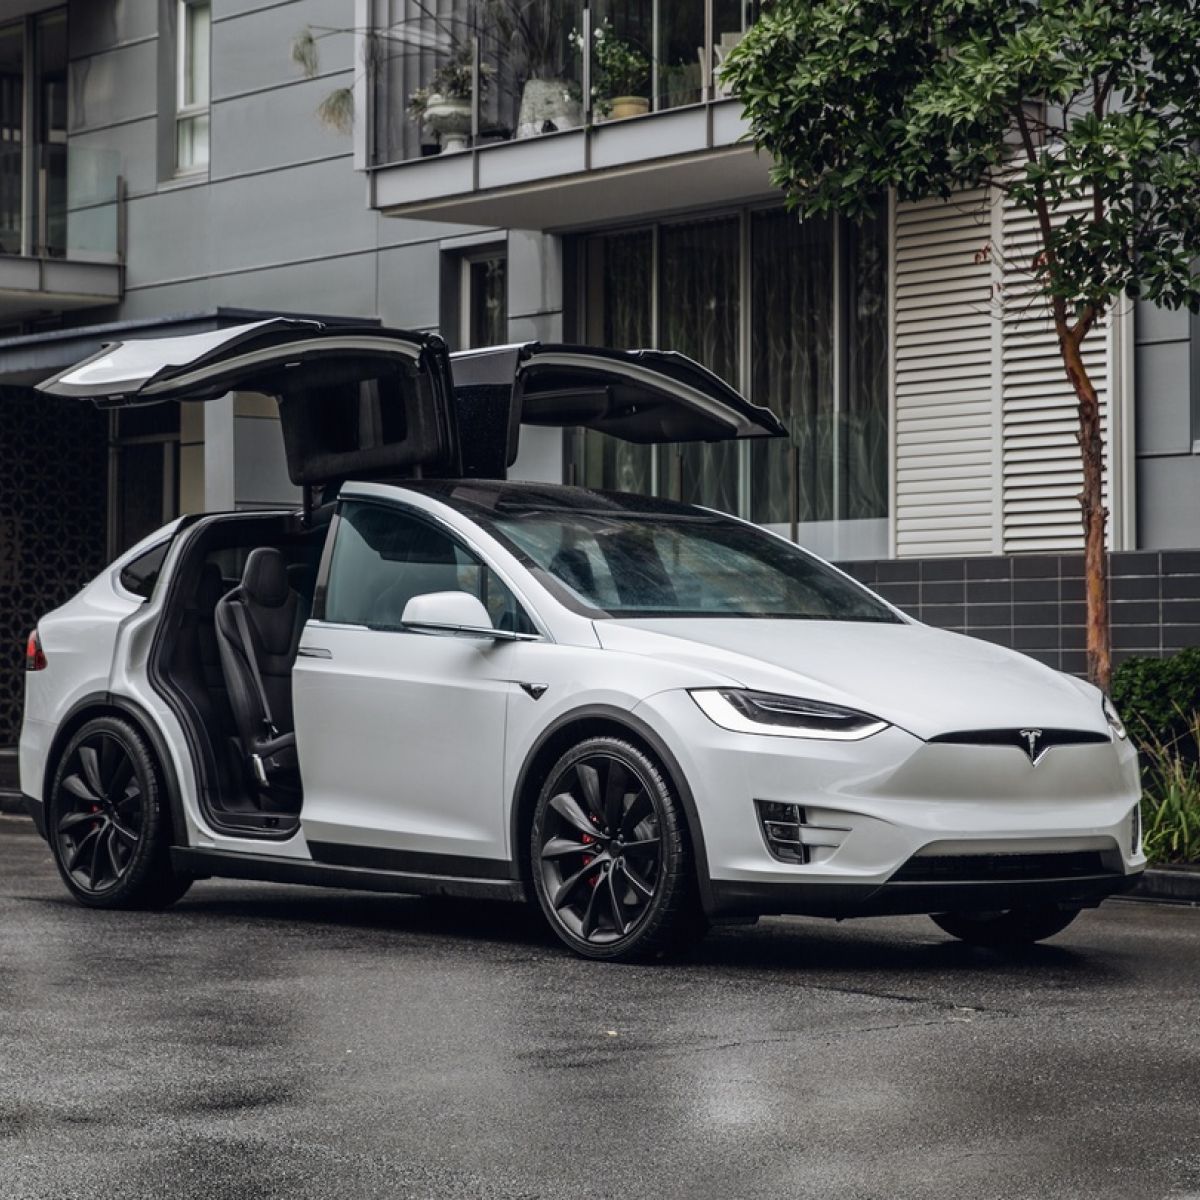 Tesla's next-gen Model X: A frustrating drive – but everyone will love it